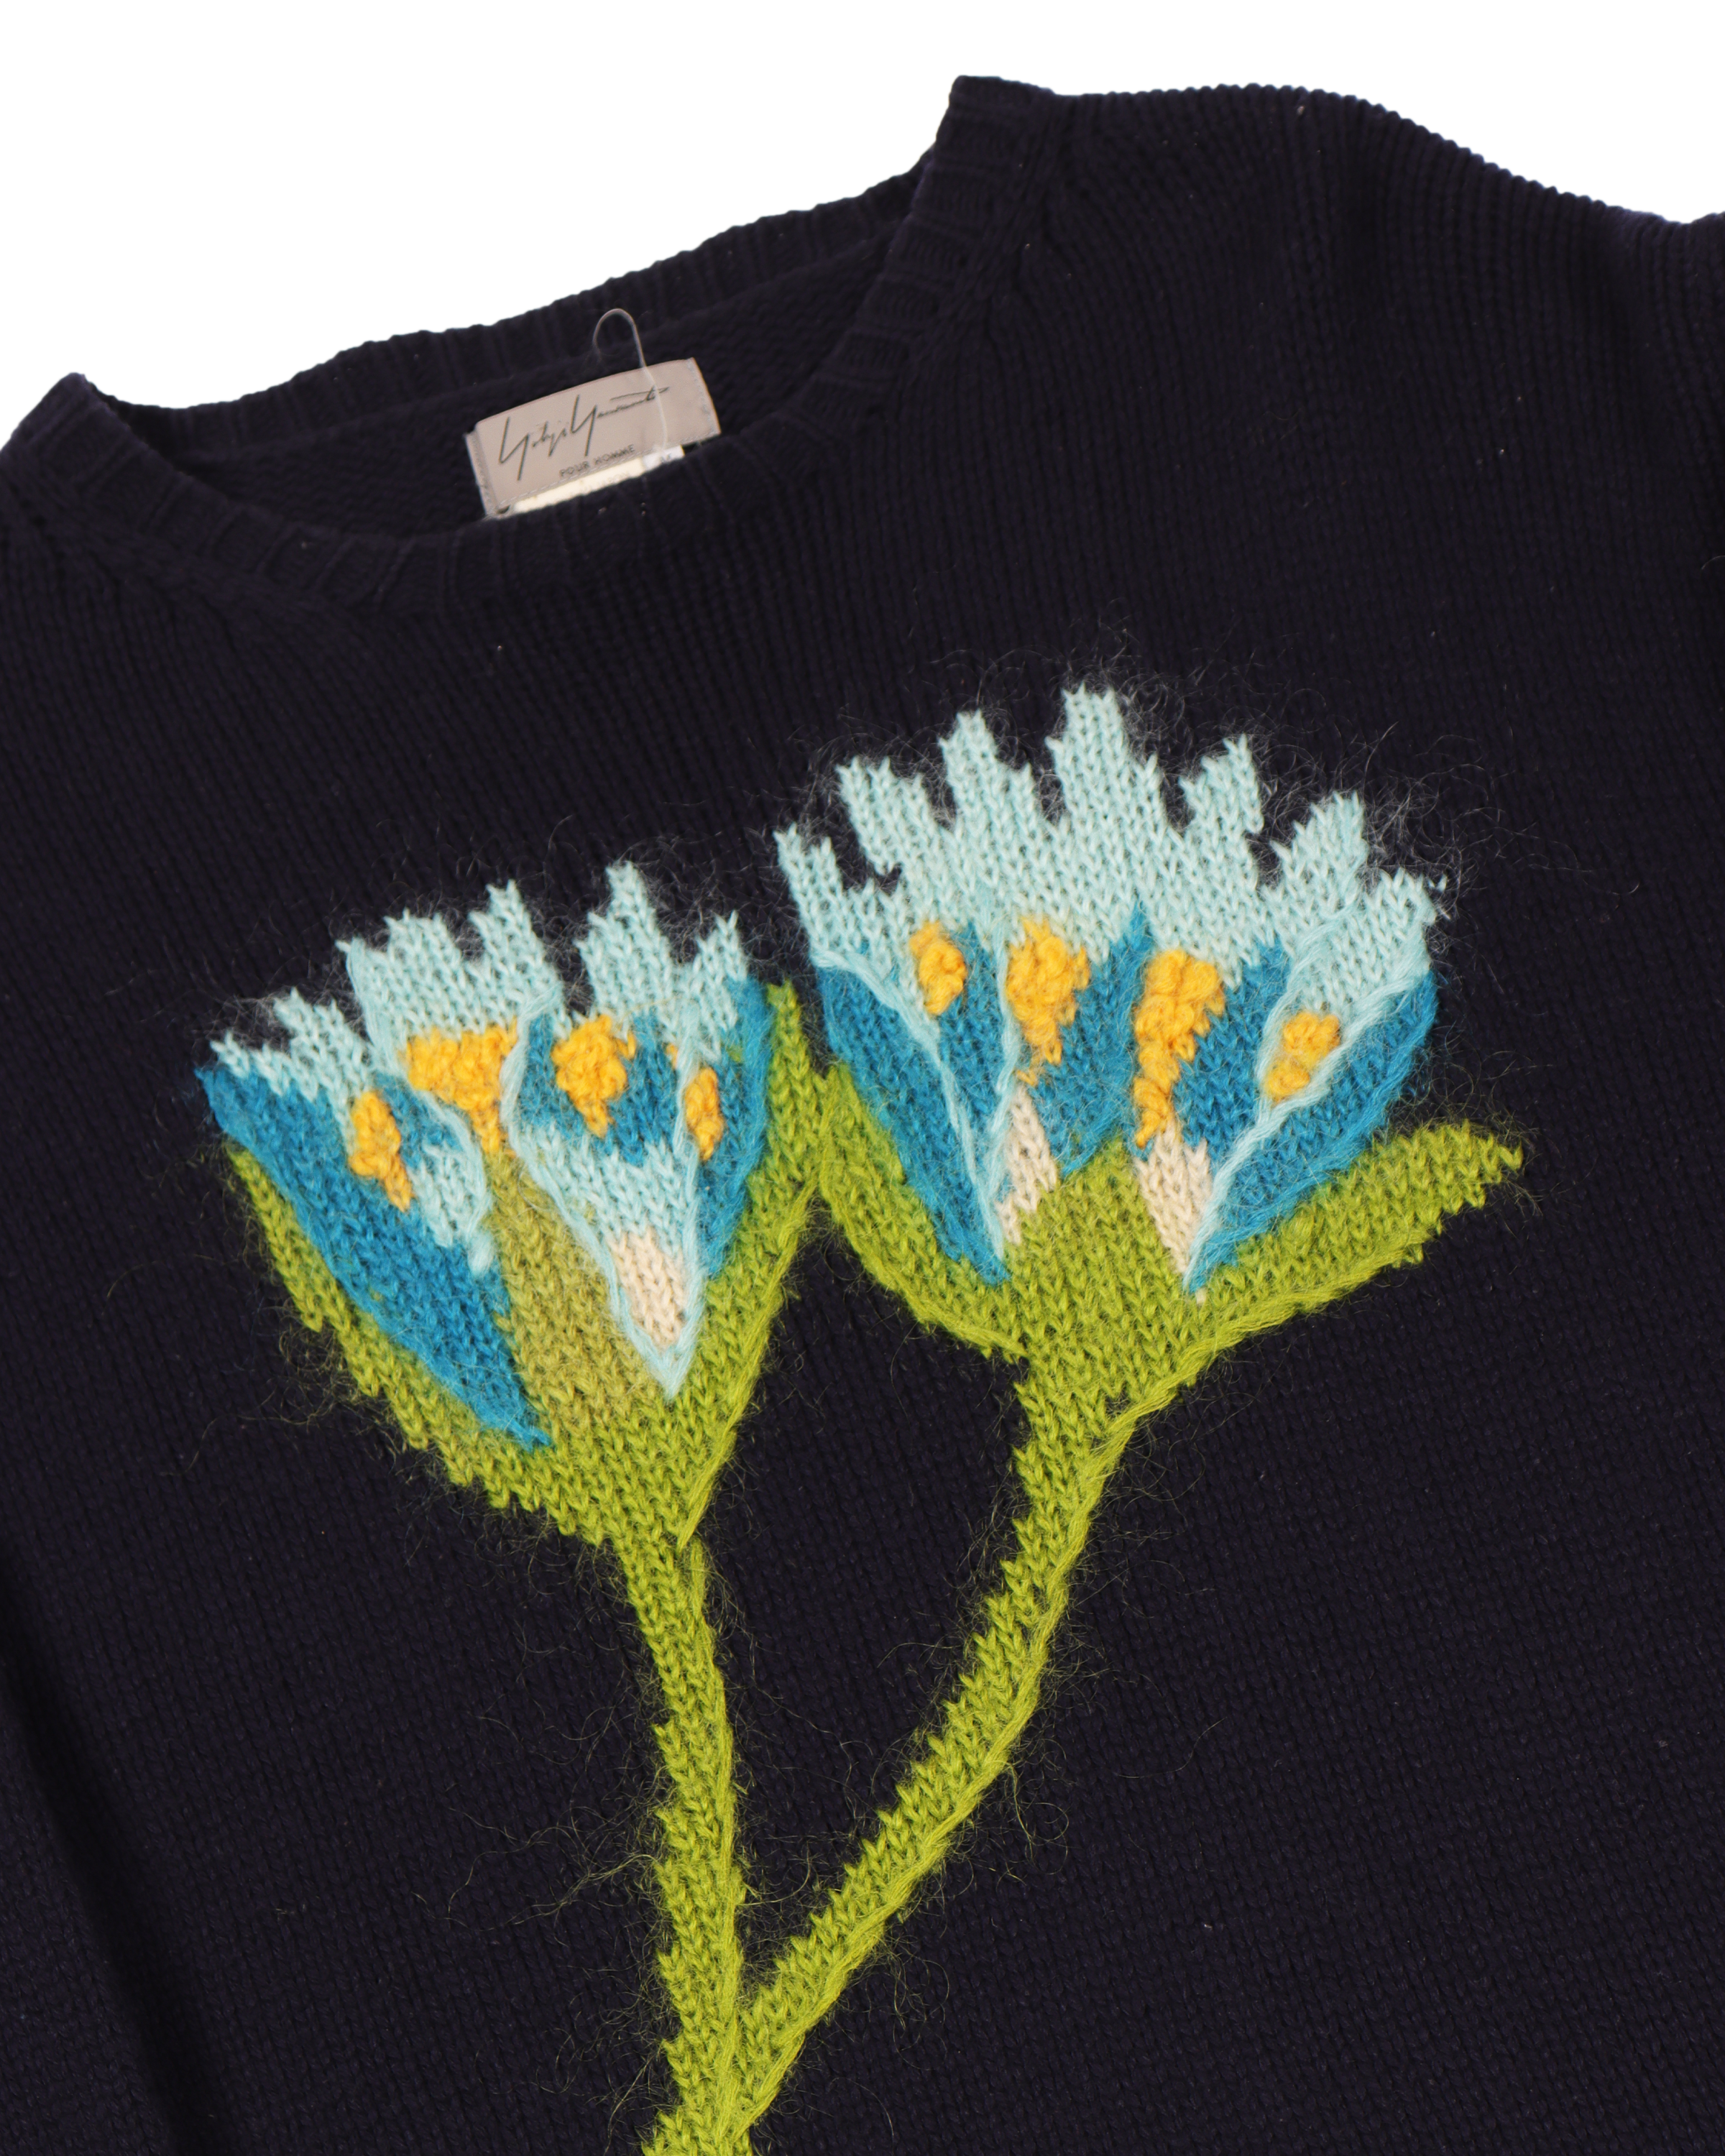 AW 1995 Intasaria Flower Sweater